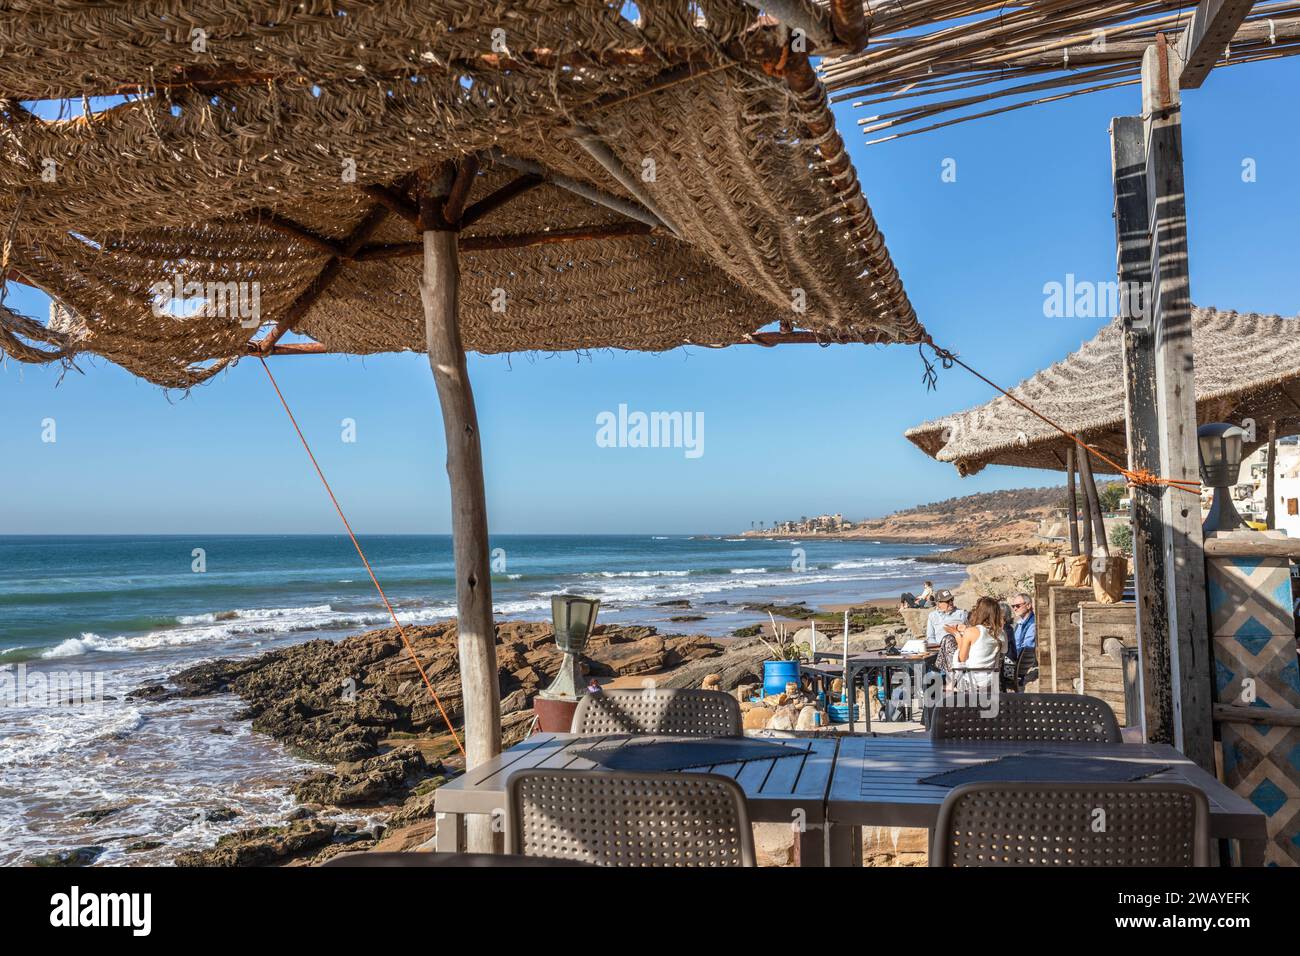 View of the Atlantic Ocean from a beach front cafe in Taghazout, Morocco. Stock Photo